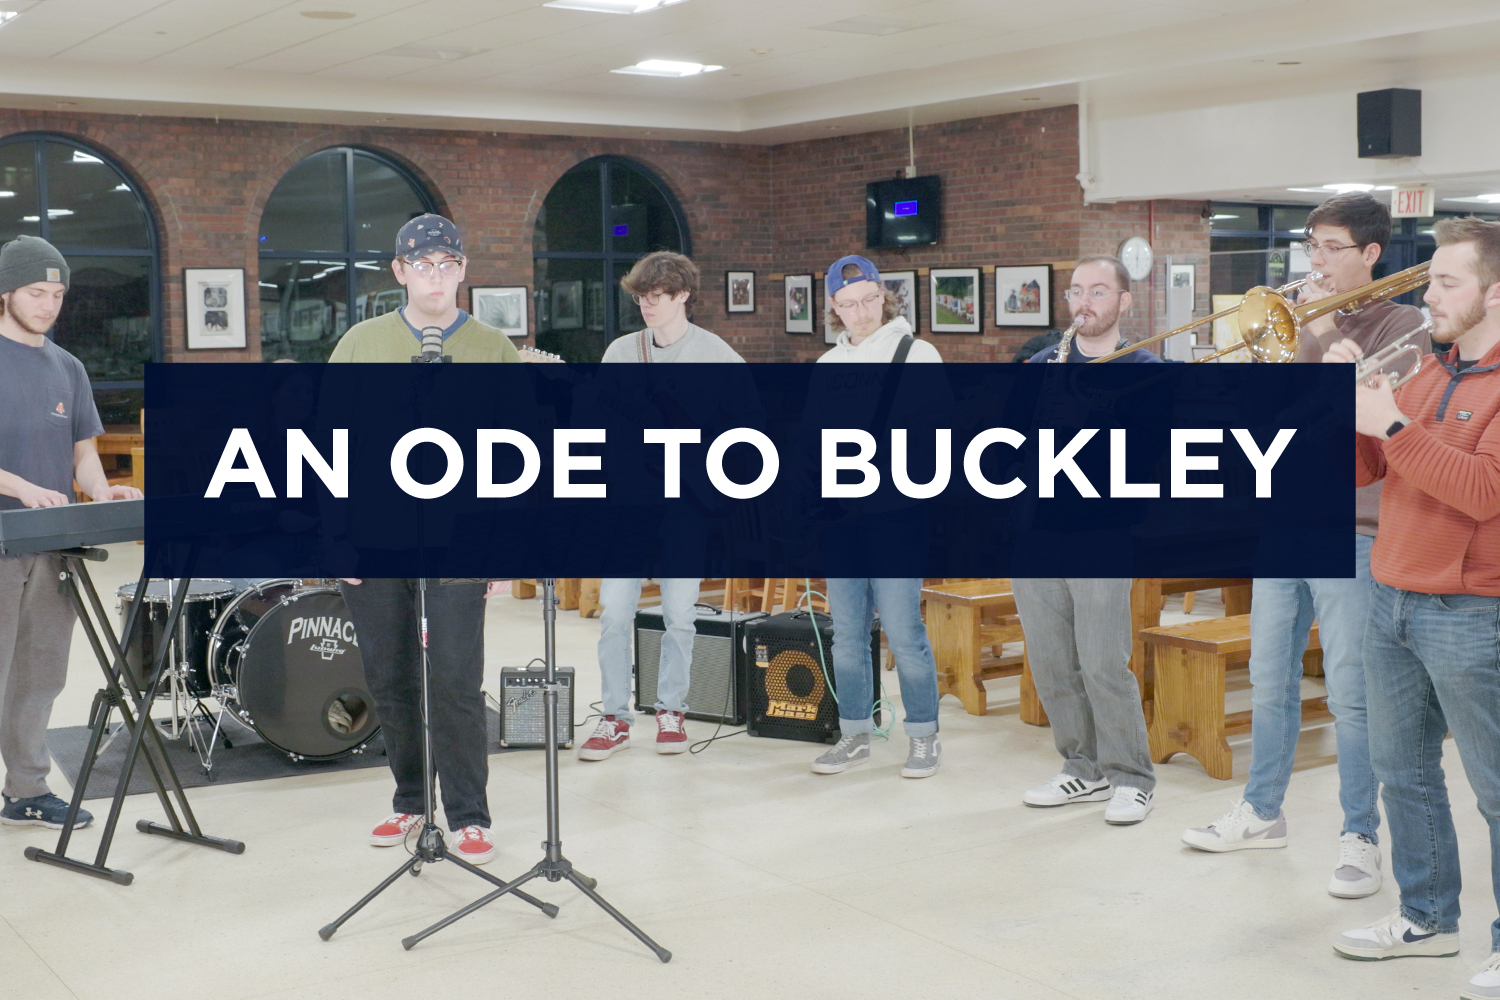 Student musicians play their self-penned "Ode to Buckley" in the titular dining hall.